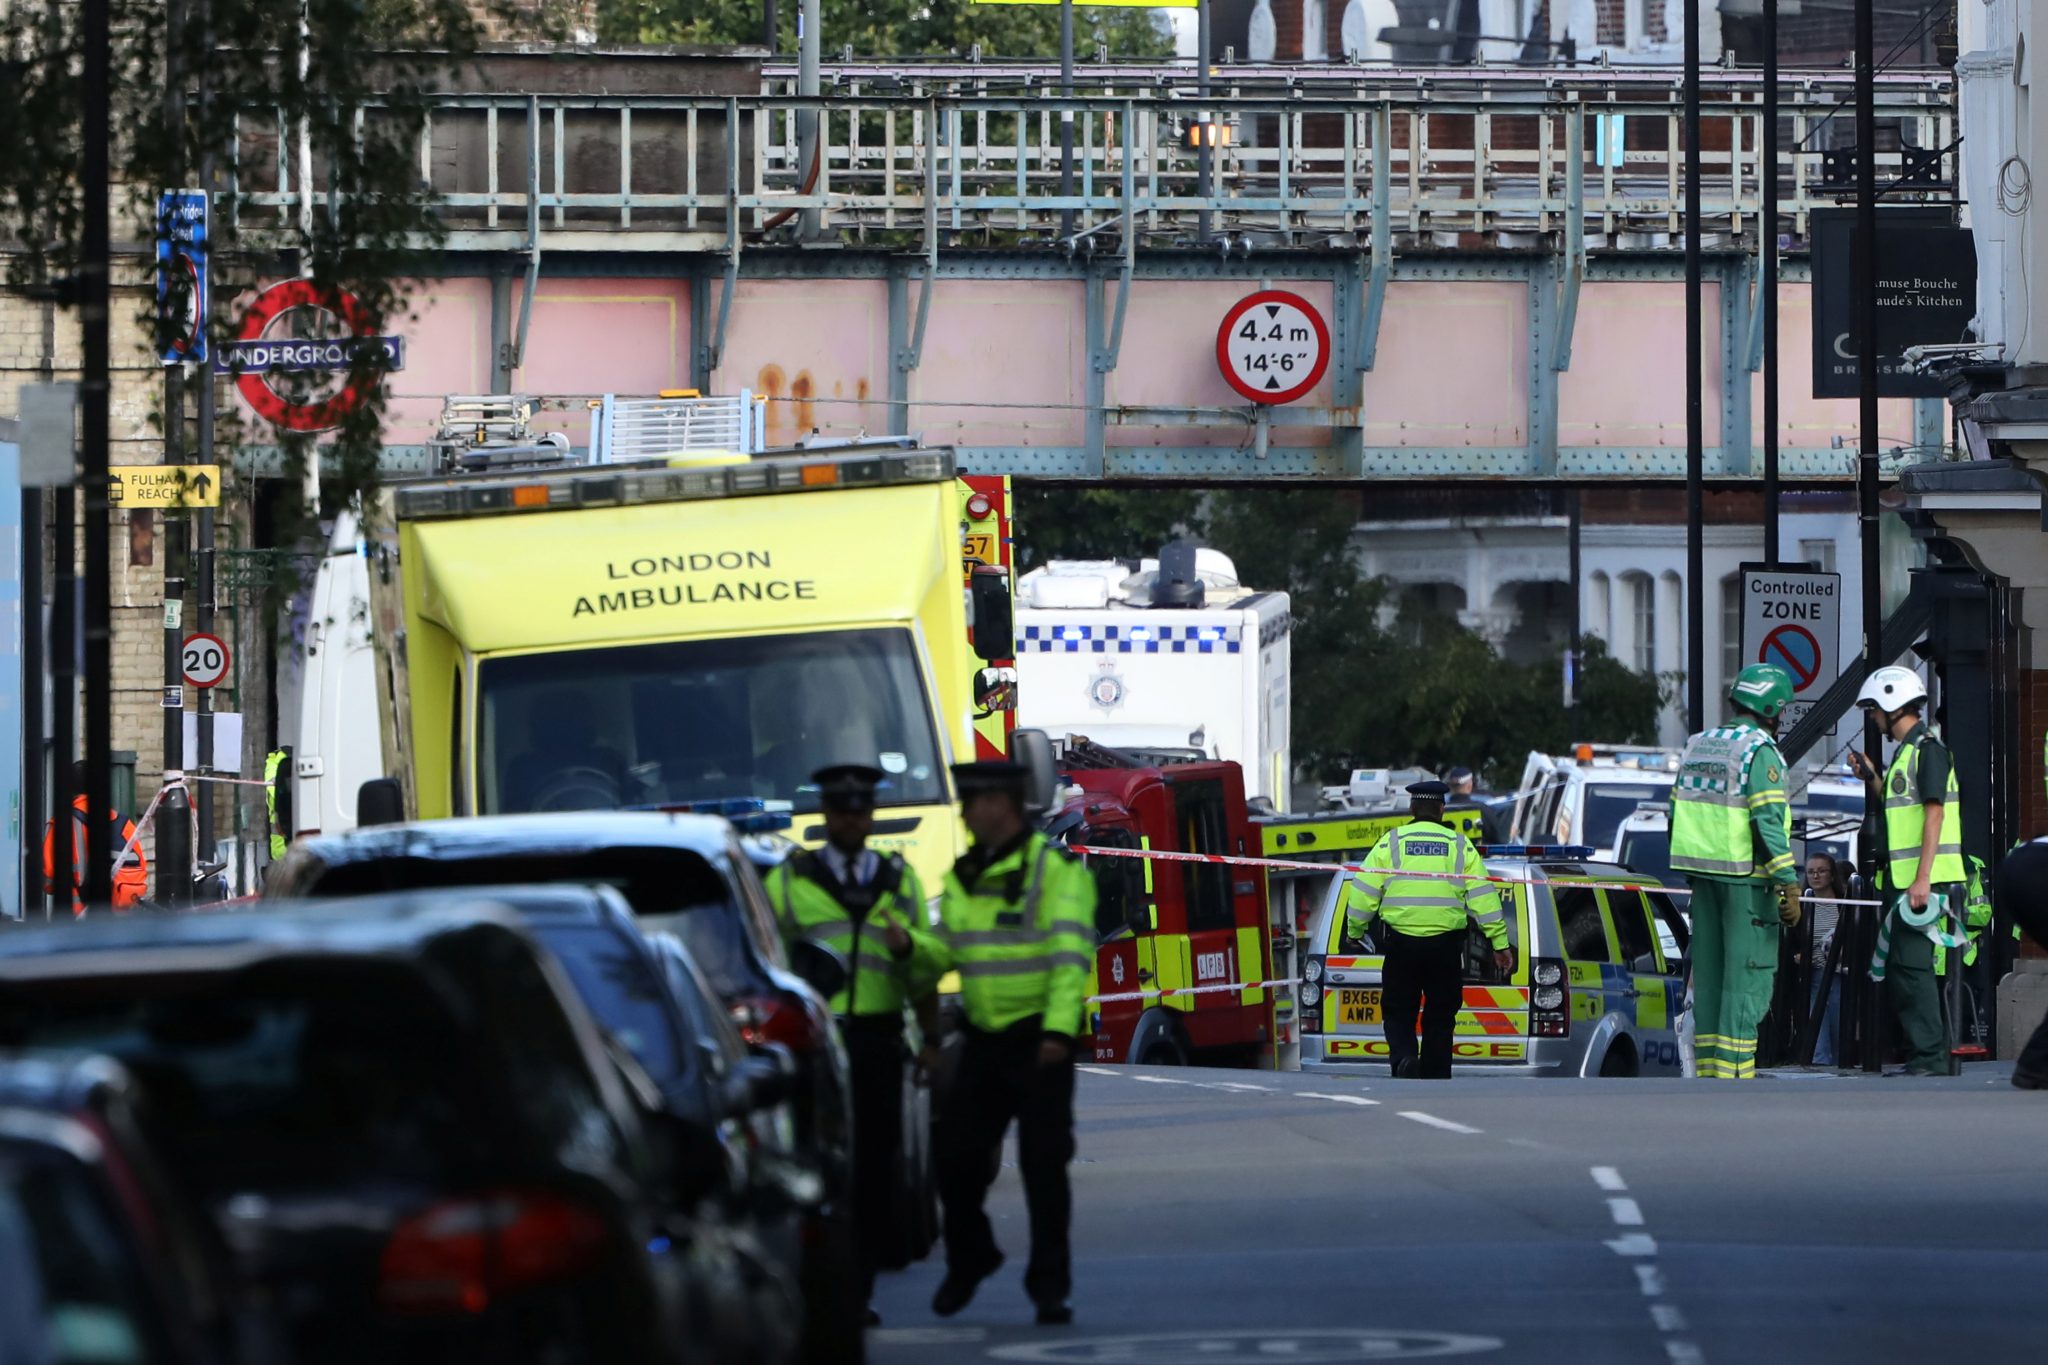 Police, fire and ambulance crew attend to an incident at Parsons Green underground station in London | REUTERS